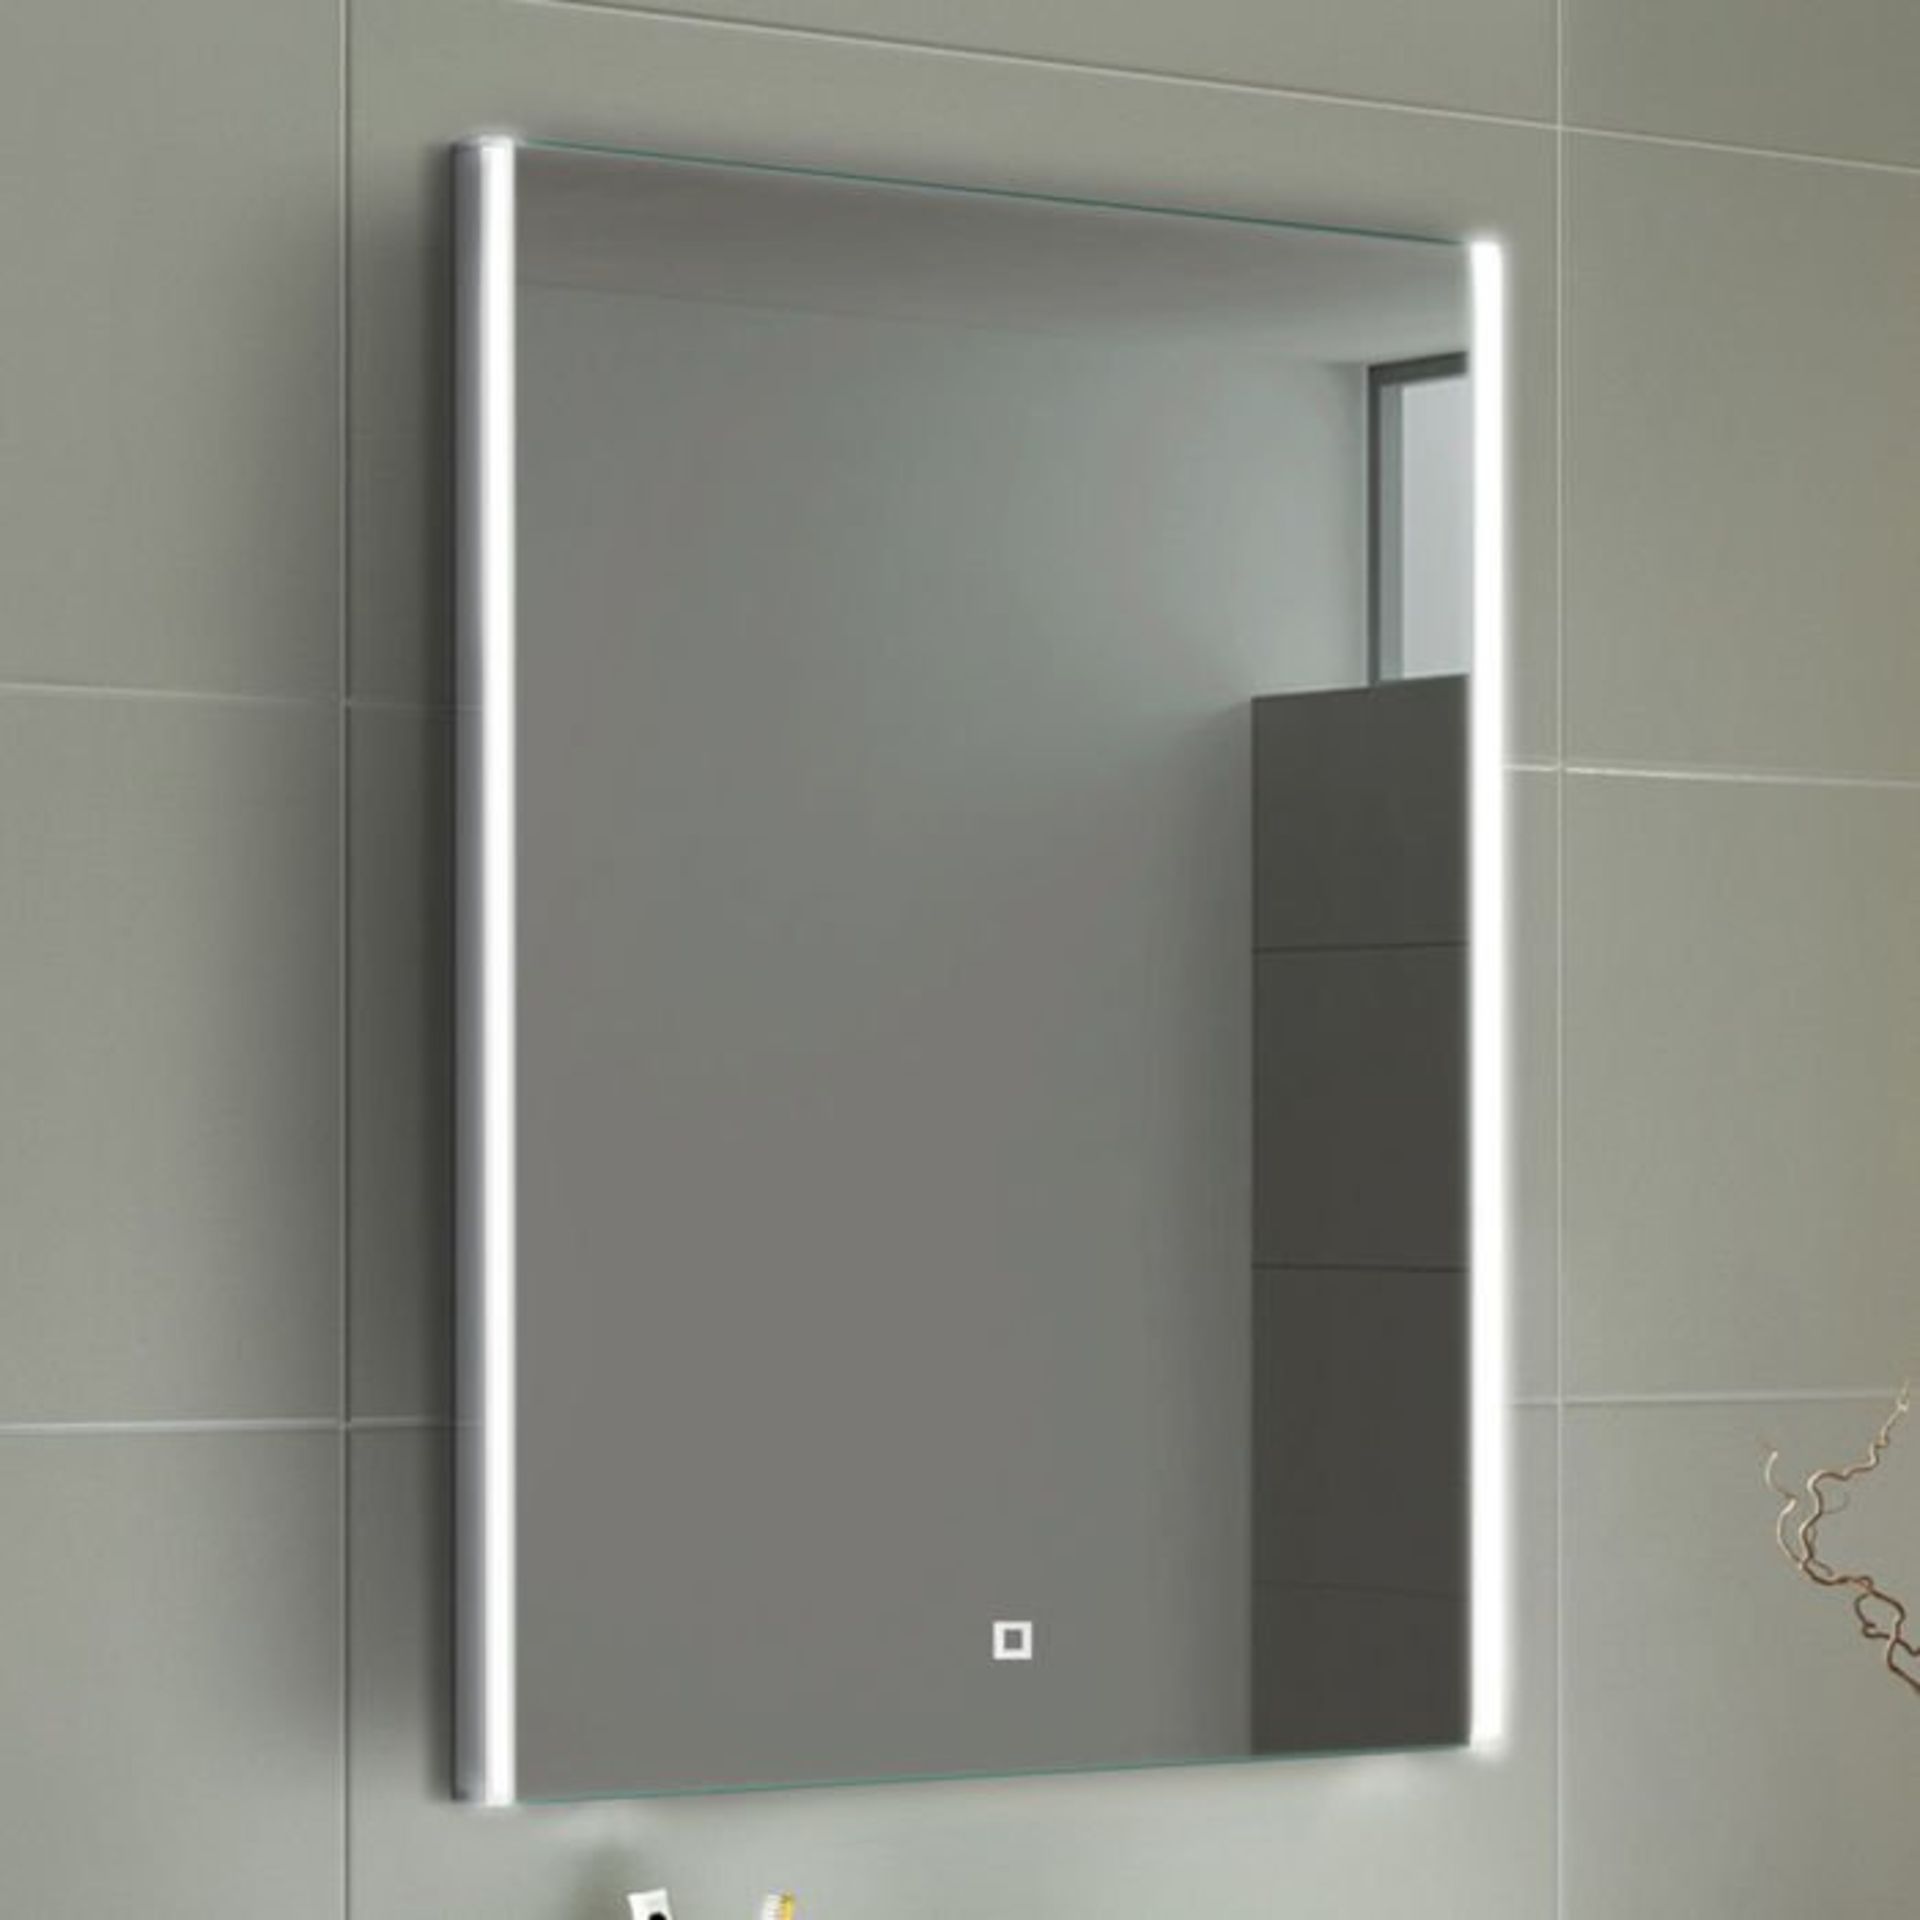 (Y205) 700x500mm Denver Illuminated LED Mirror - Switch Control. RRP £349.99. Energy efficient LED - Image 3 of 5